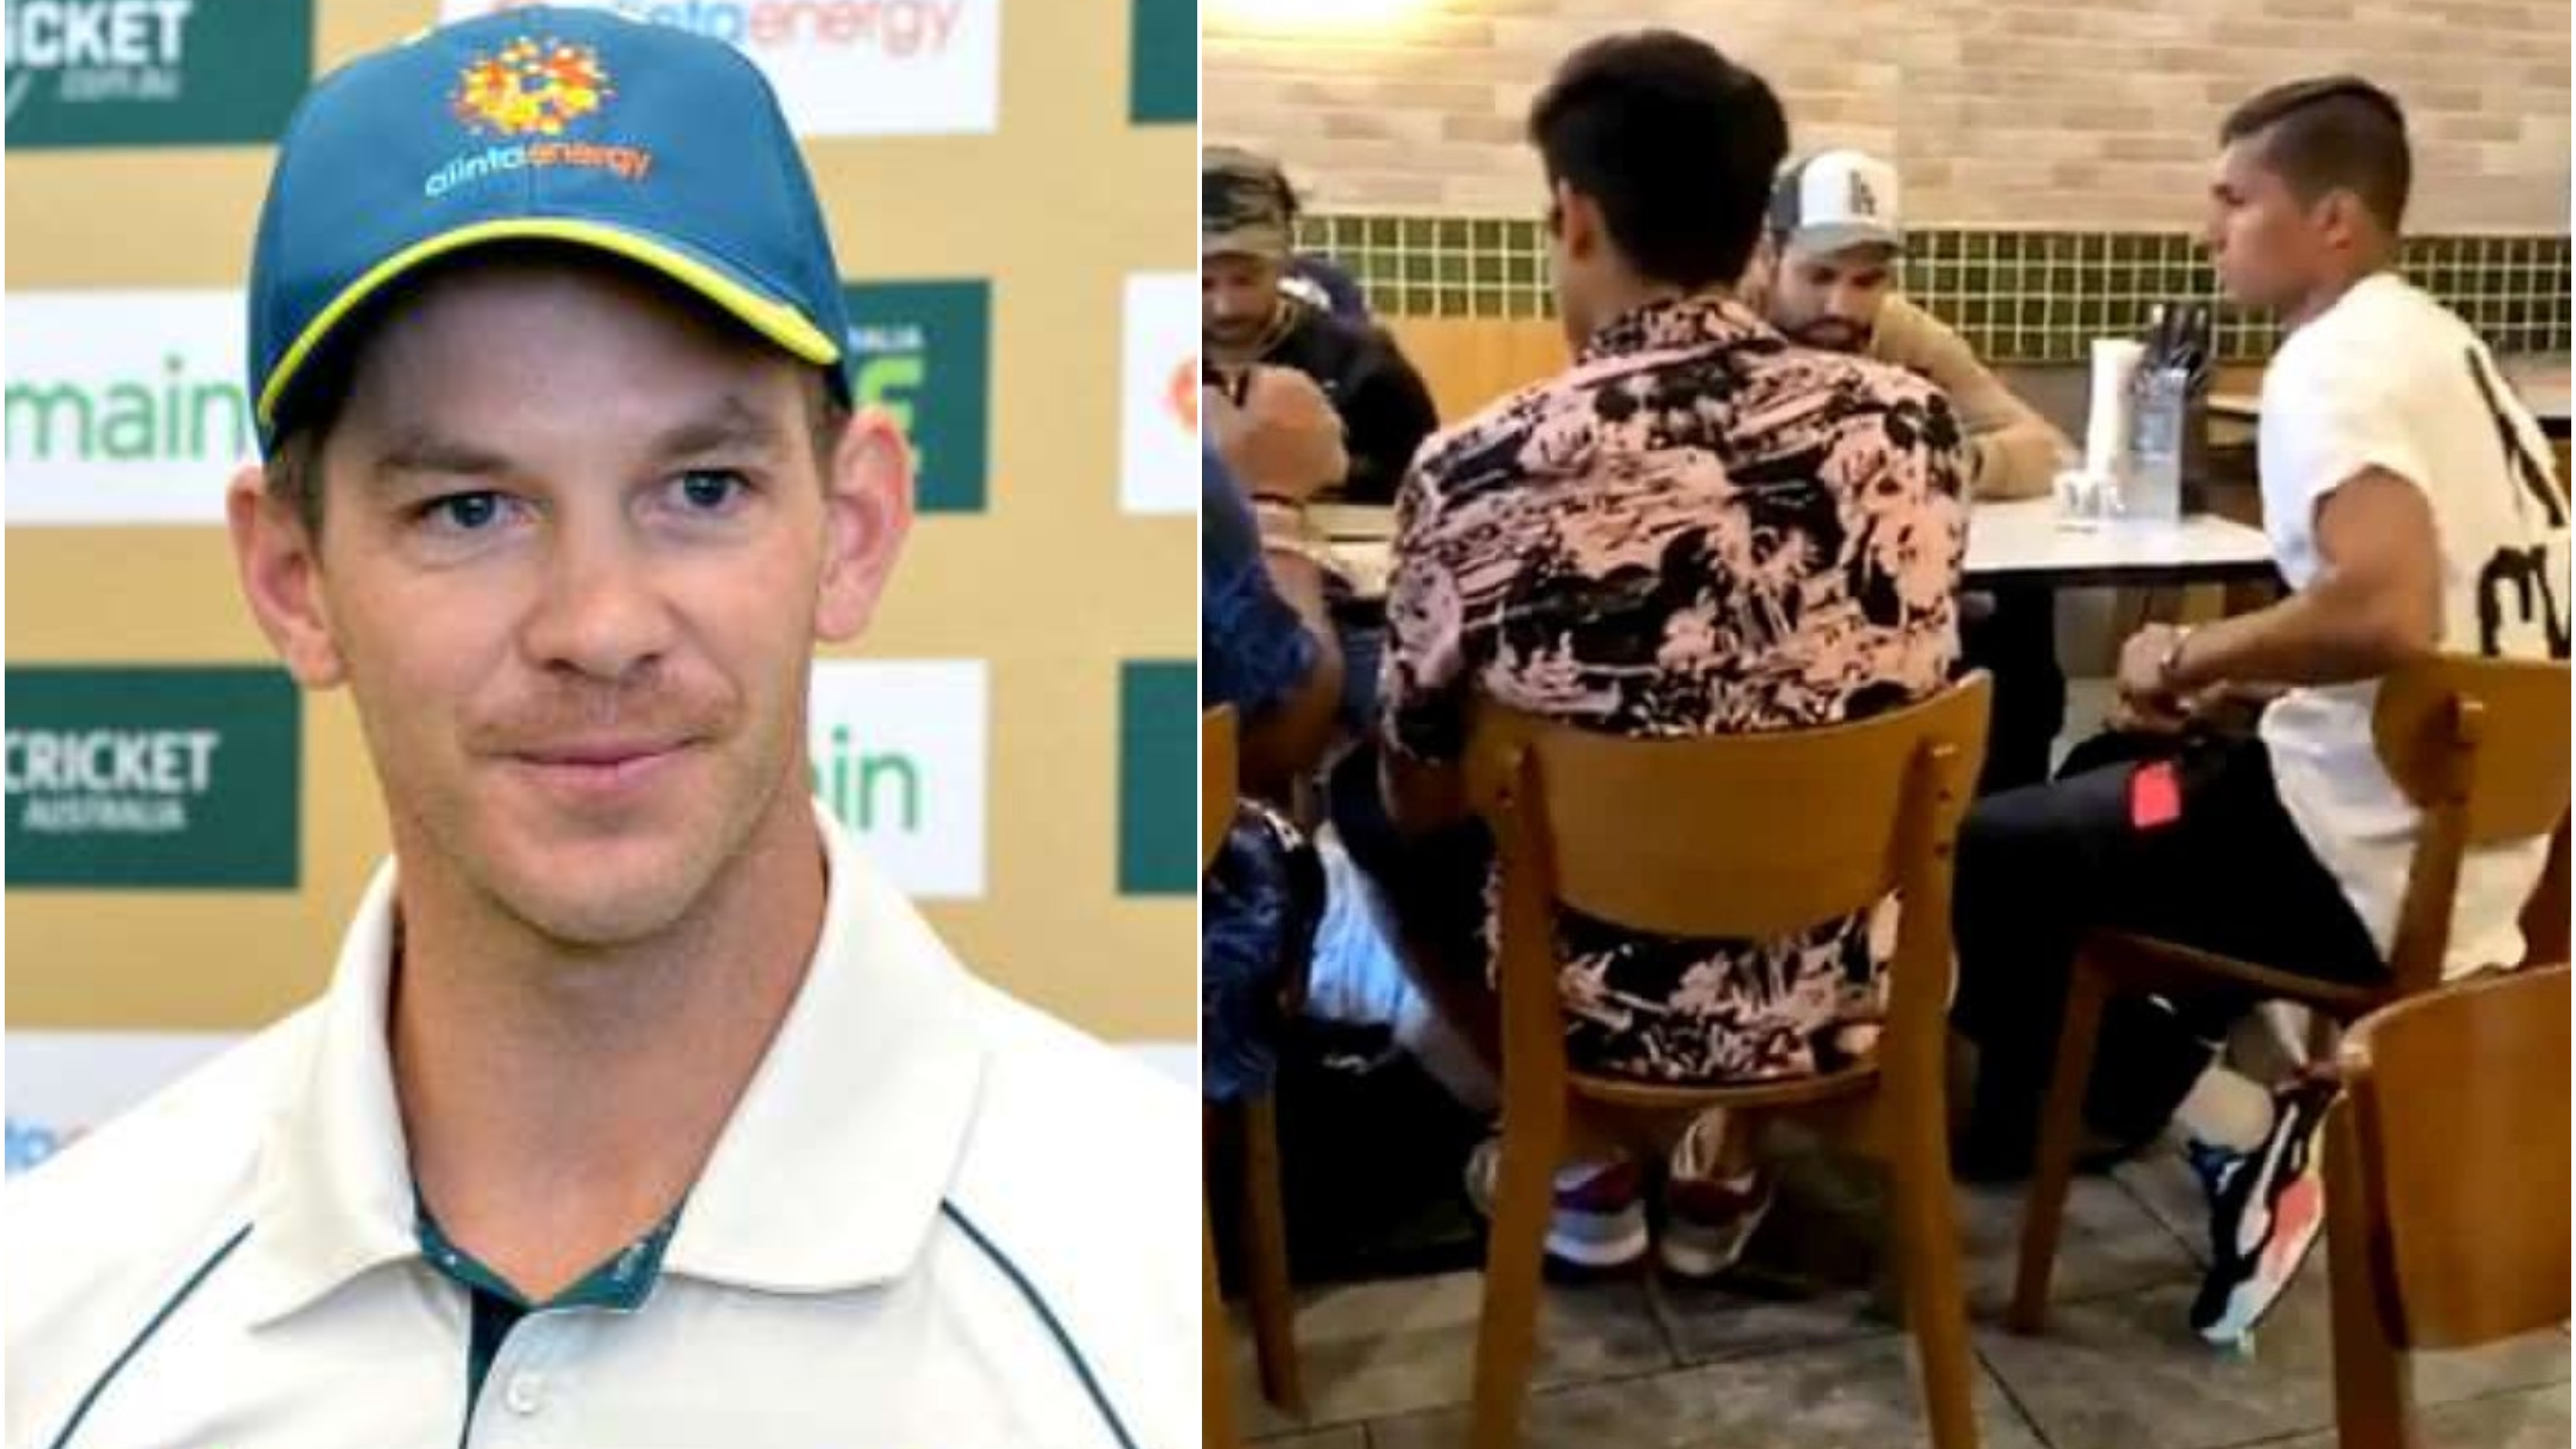 ‘4-5 guys put the whole Test series at risk’, Tim Paine on Indian players seen at a restaurant during 2020-21 tour